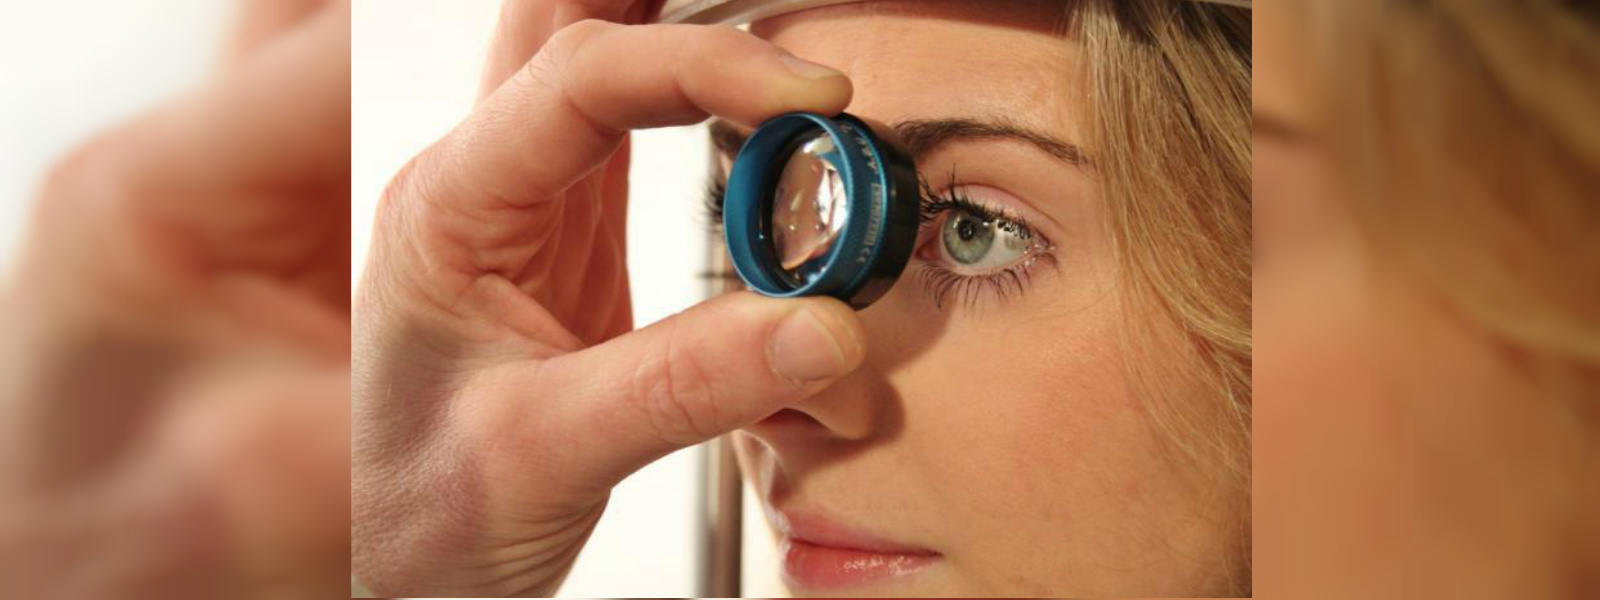 Diabetes leads to eye conditions in Sri Lanka